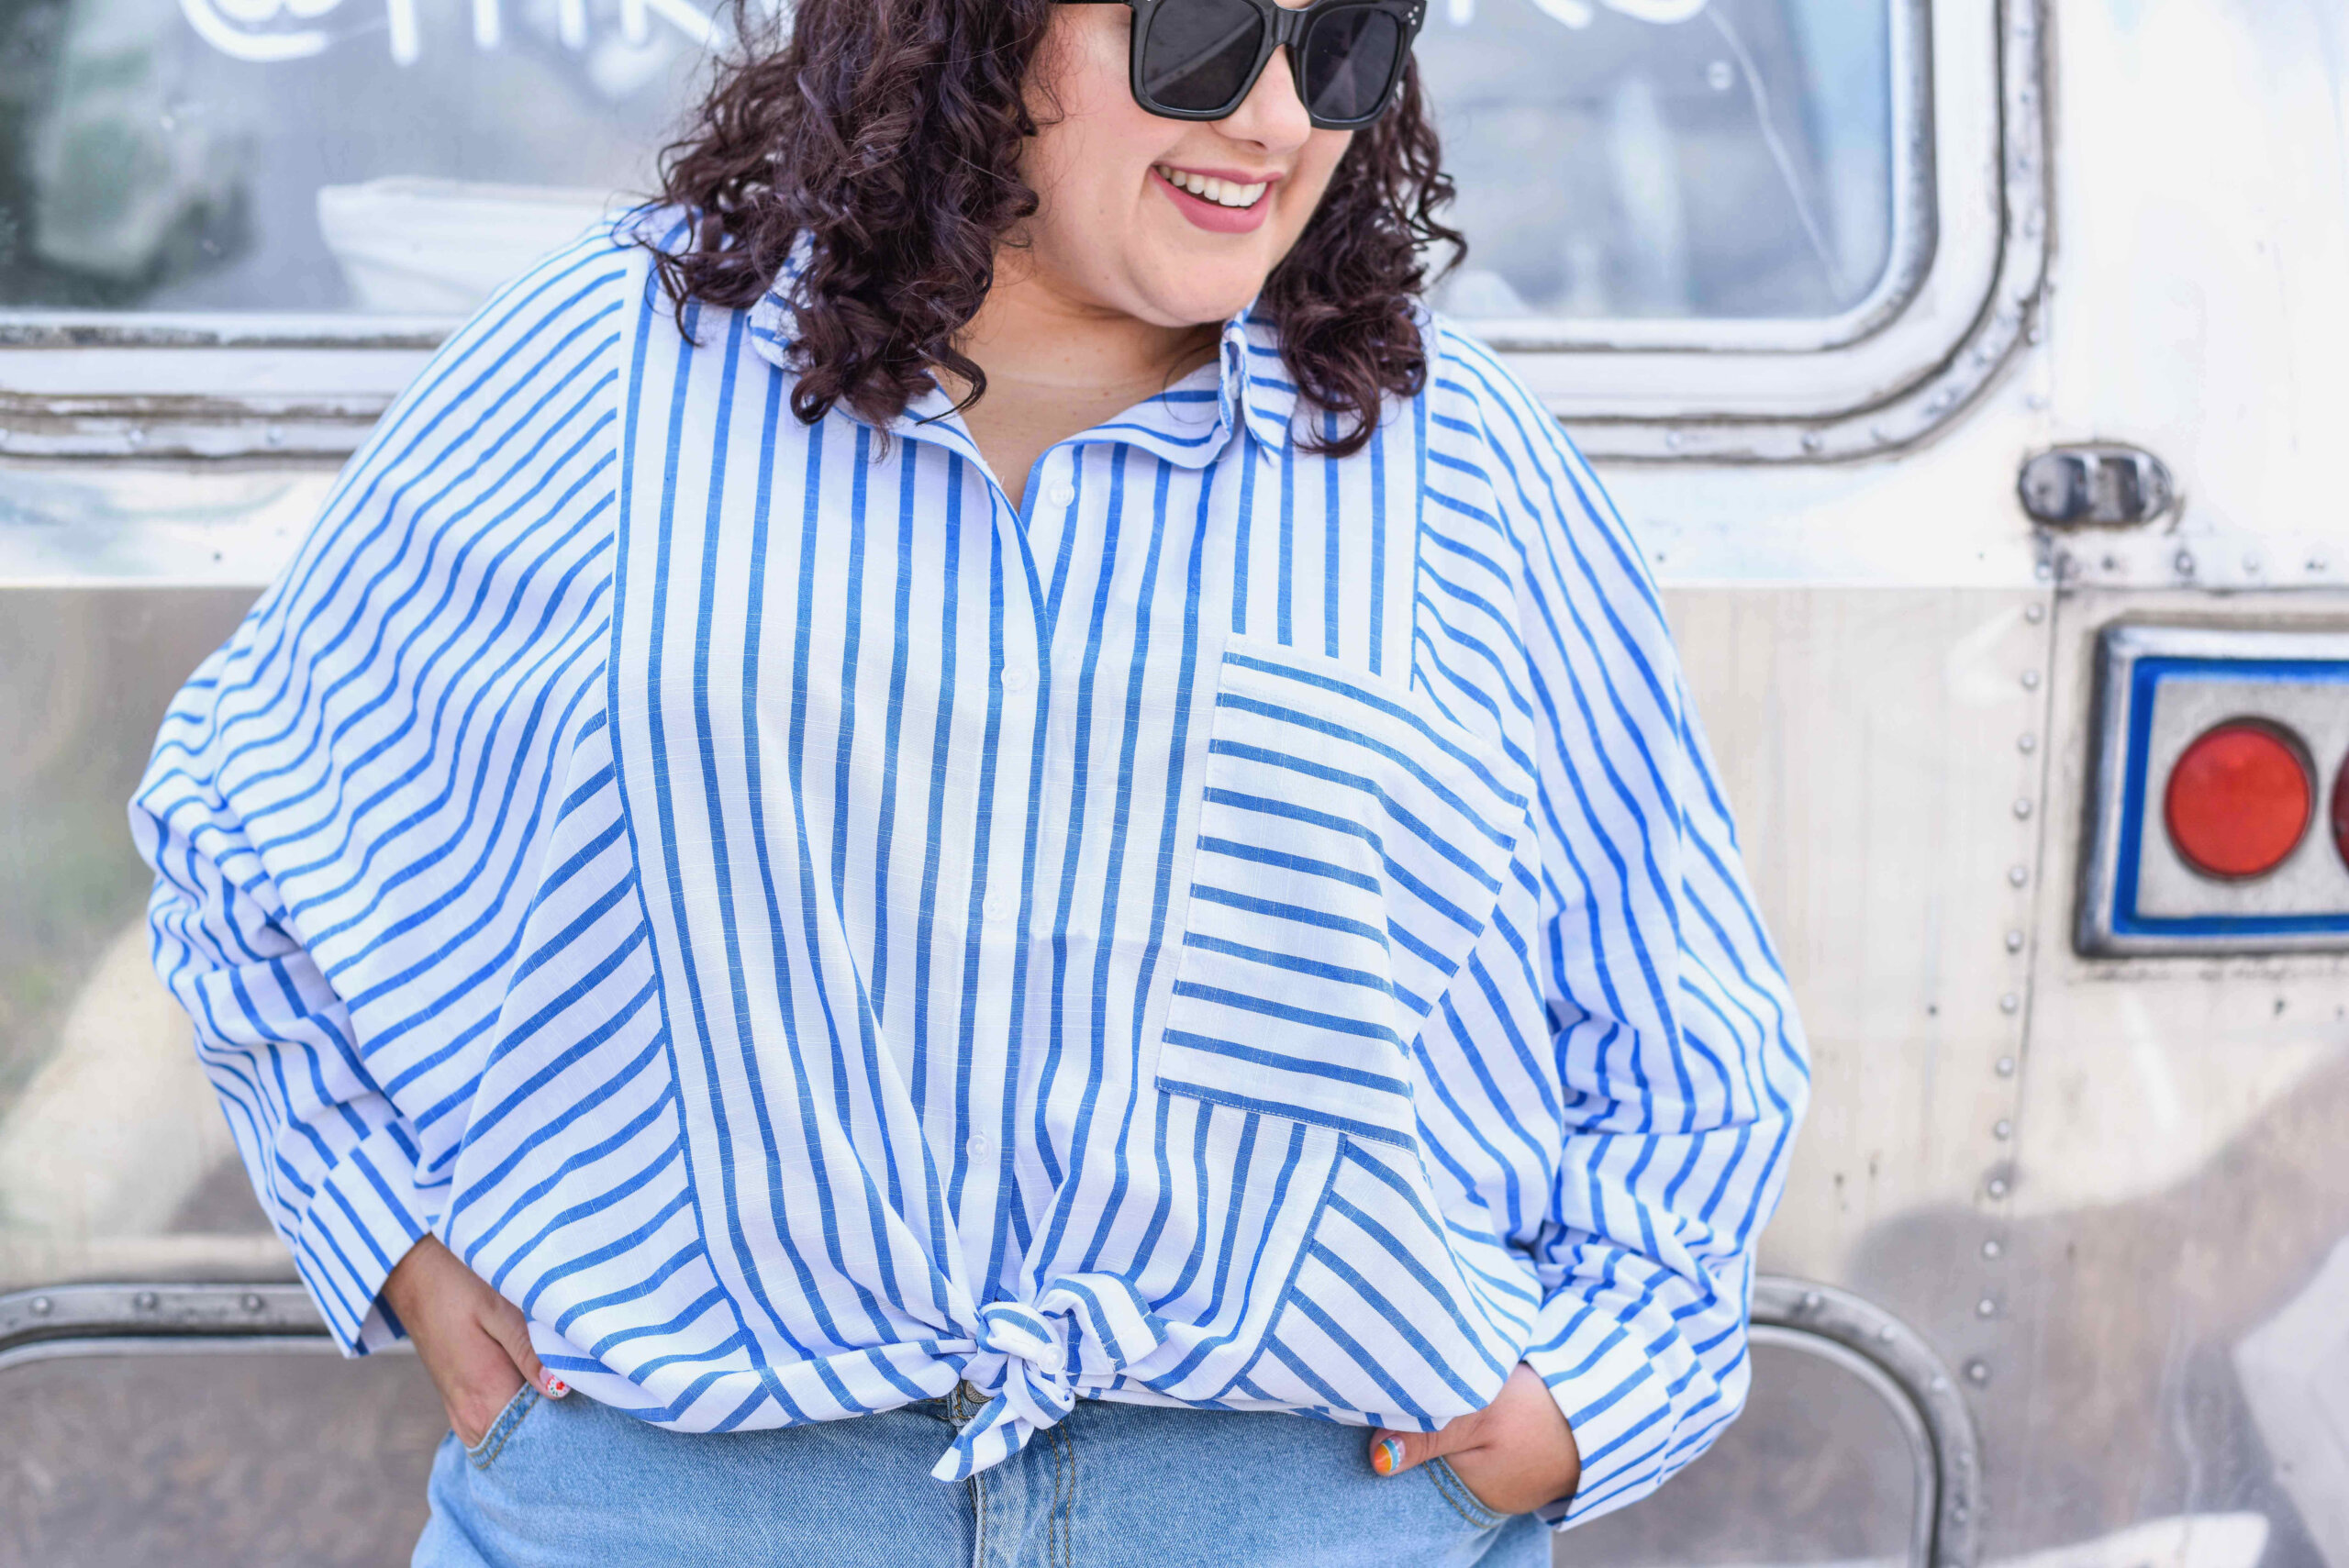 How to style striped shirt plus size